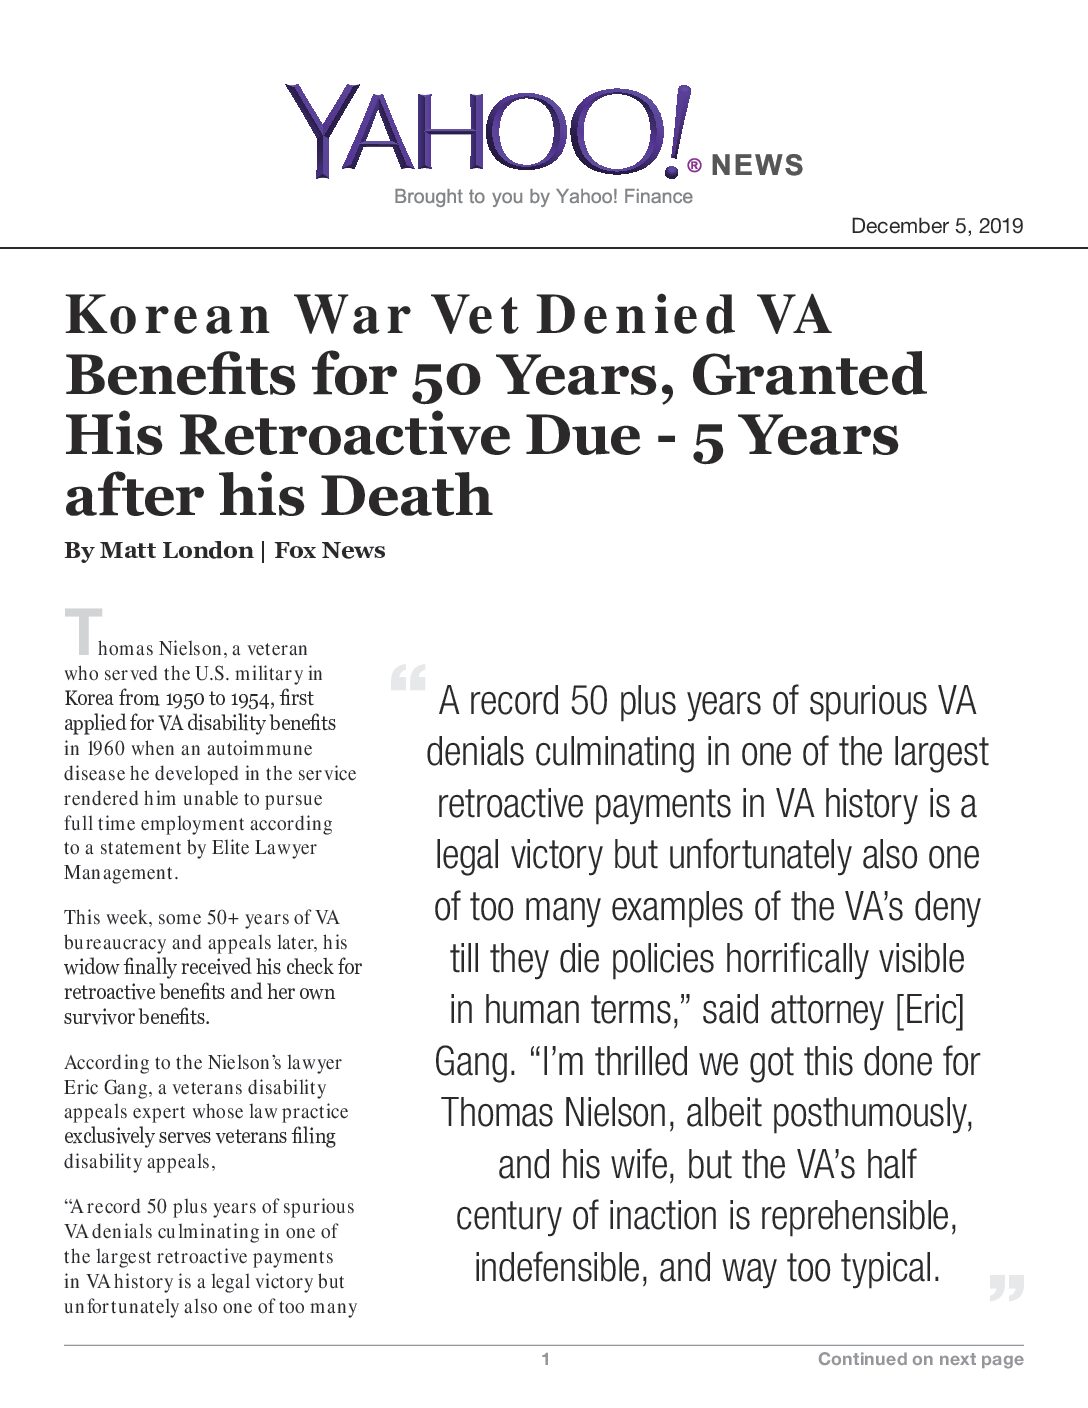 Korean War Vet Denied VA Benefits for 50 Years, Granted His Retroactive Due – 5 Years after his Death